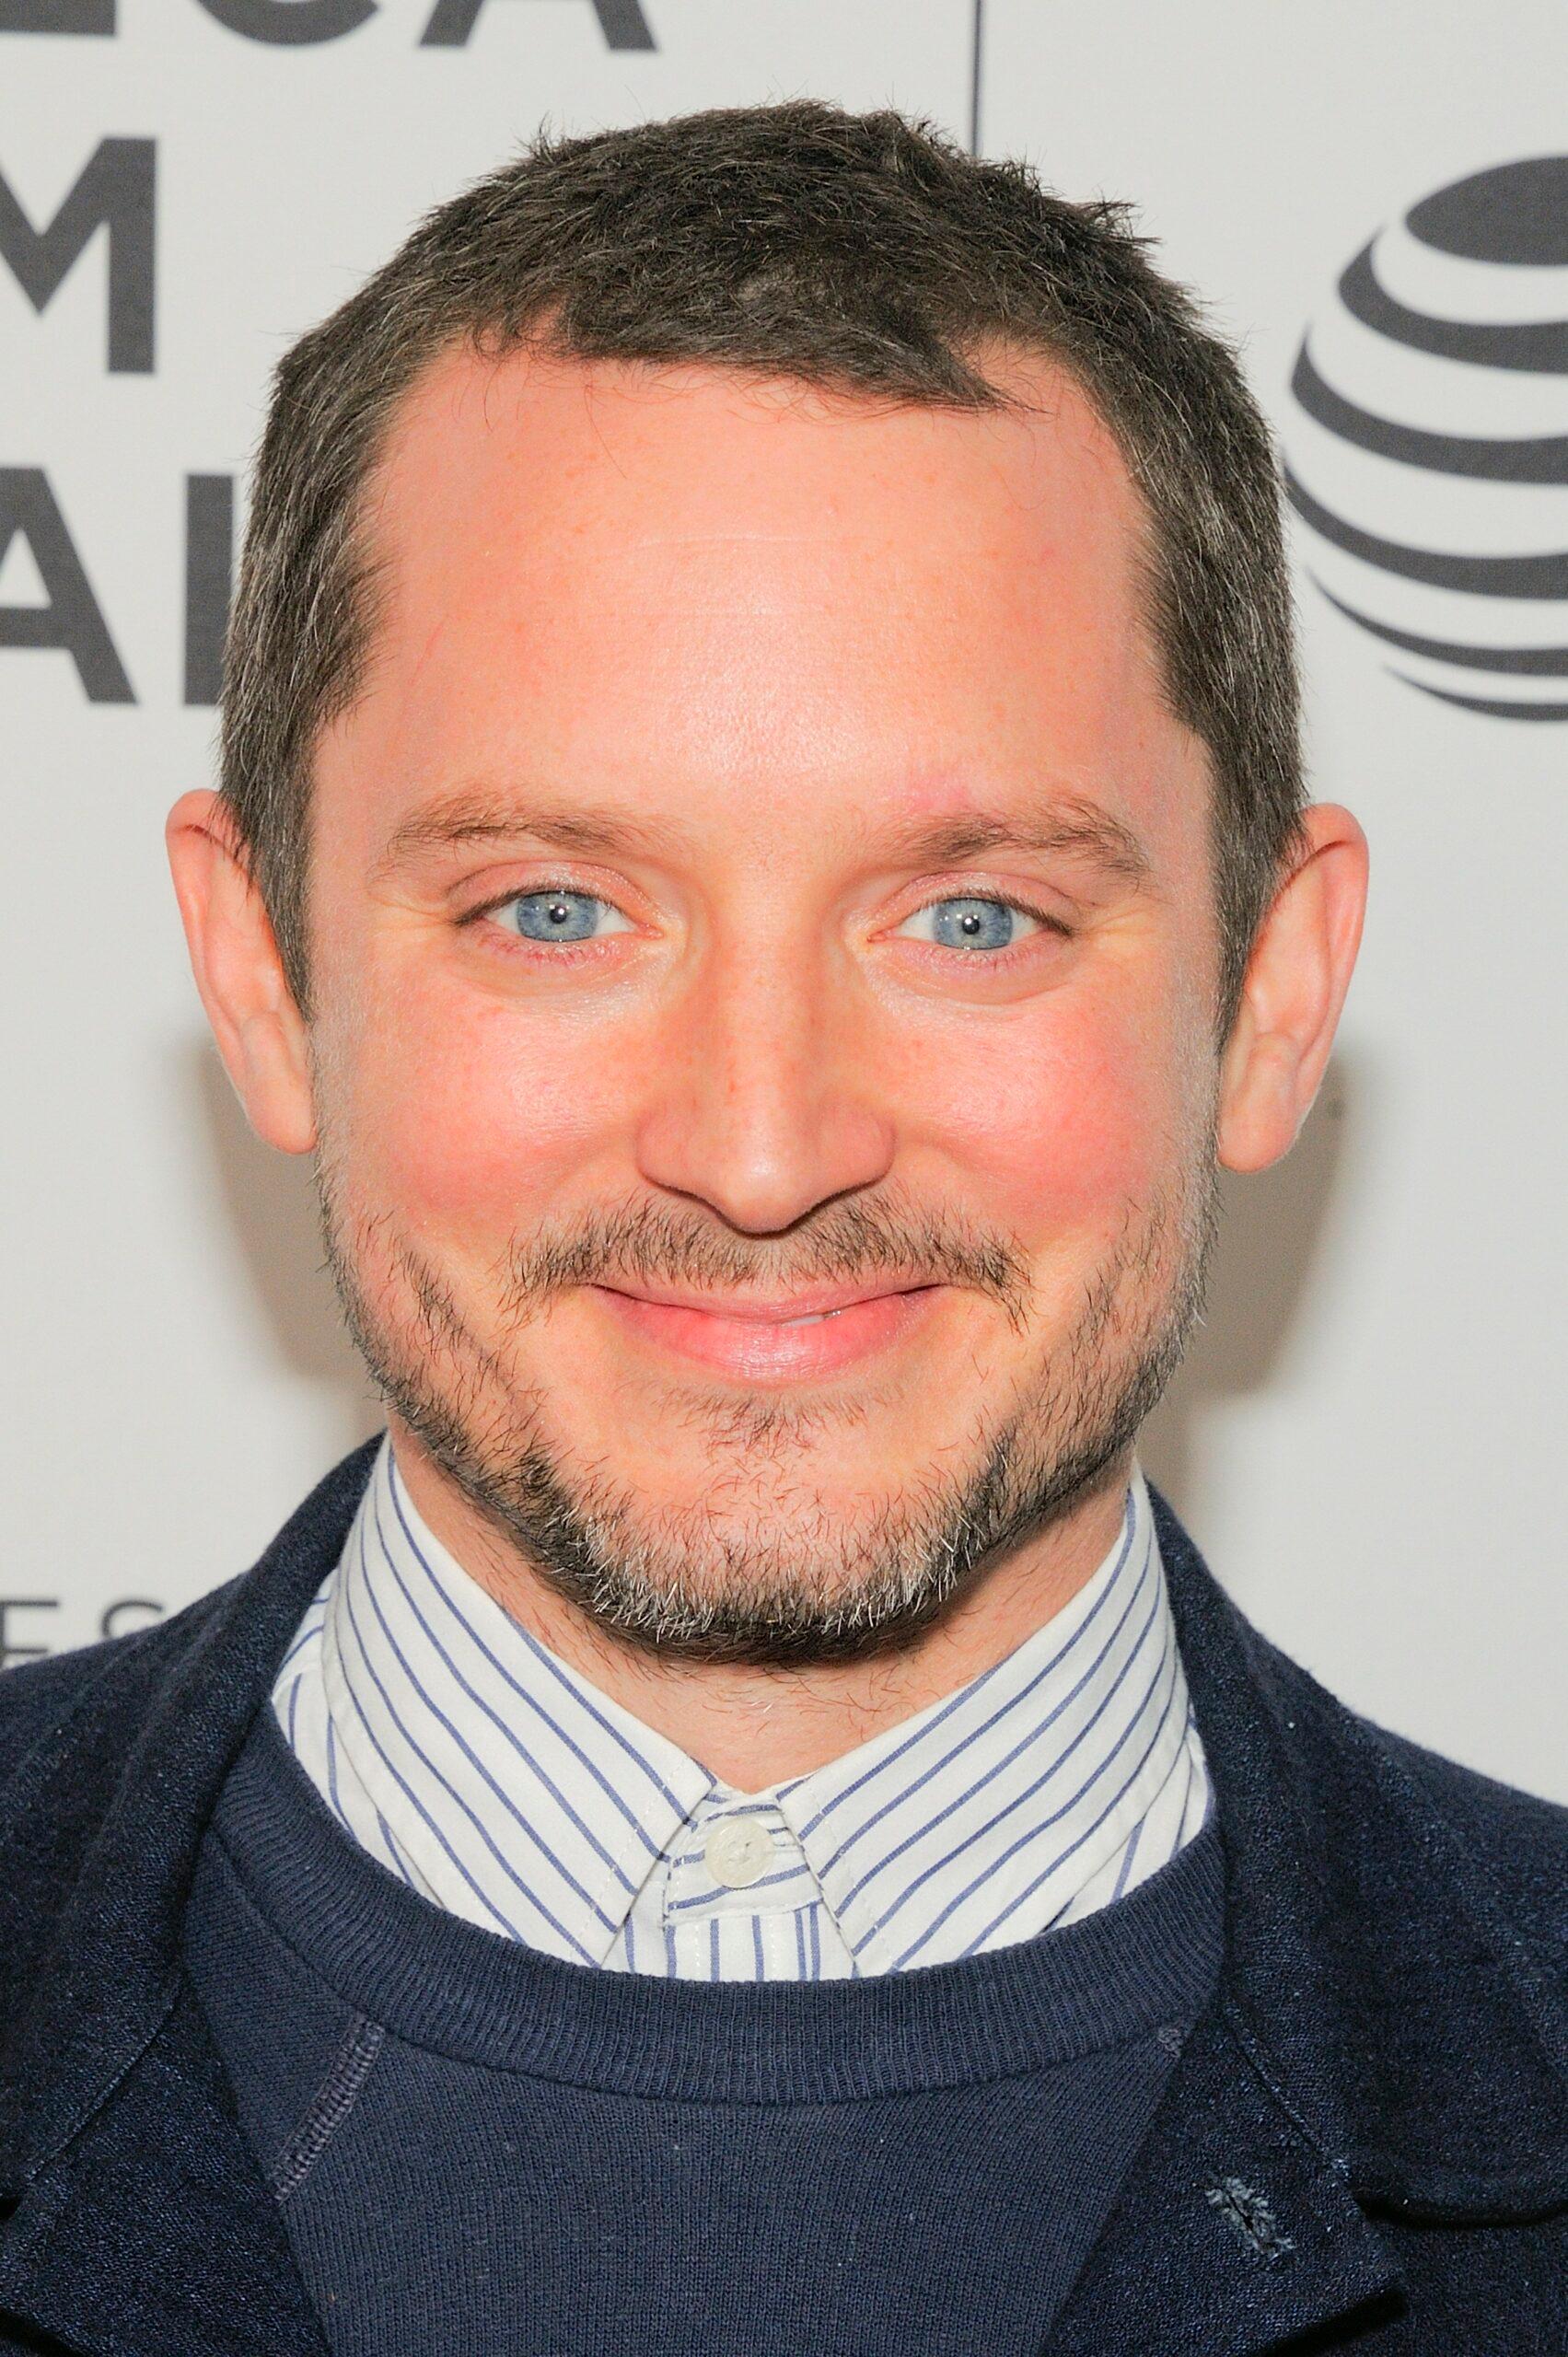 Elijah Wood attends the 'Come To Daddy' screening